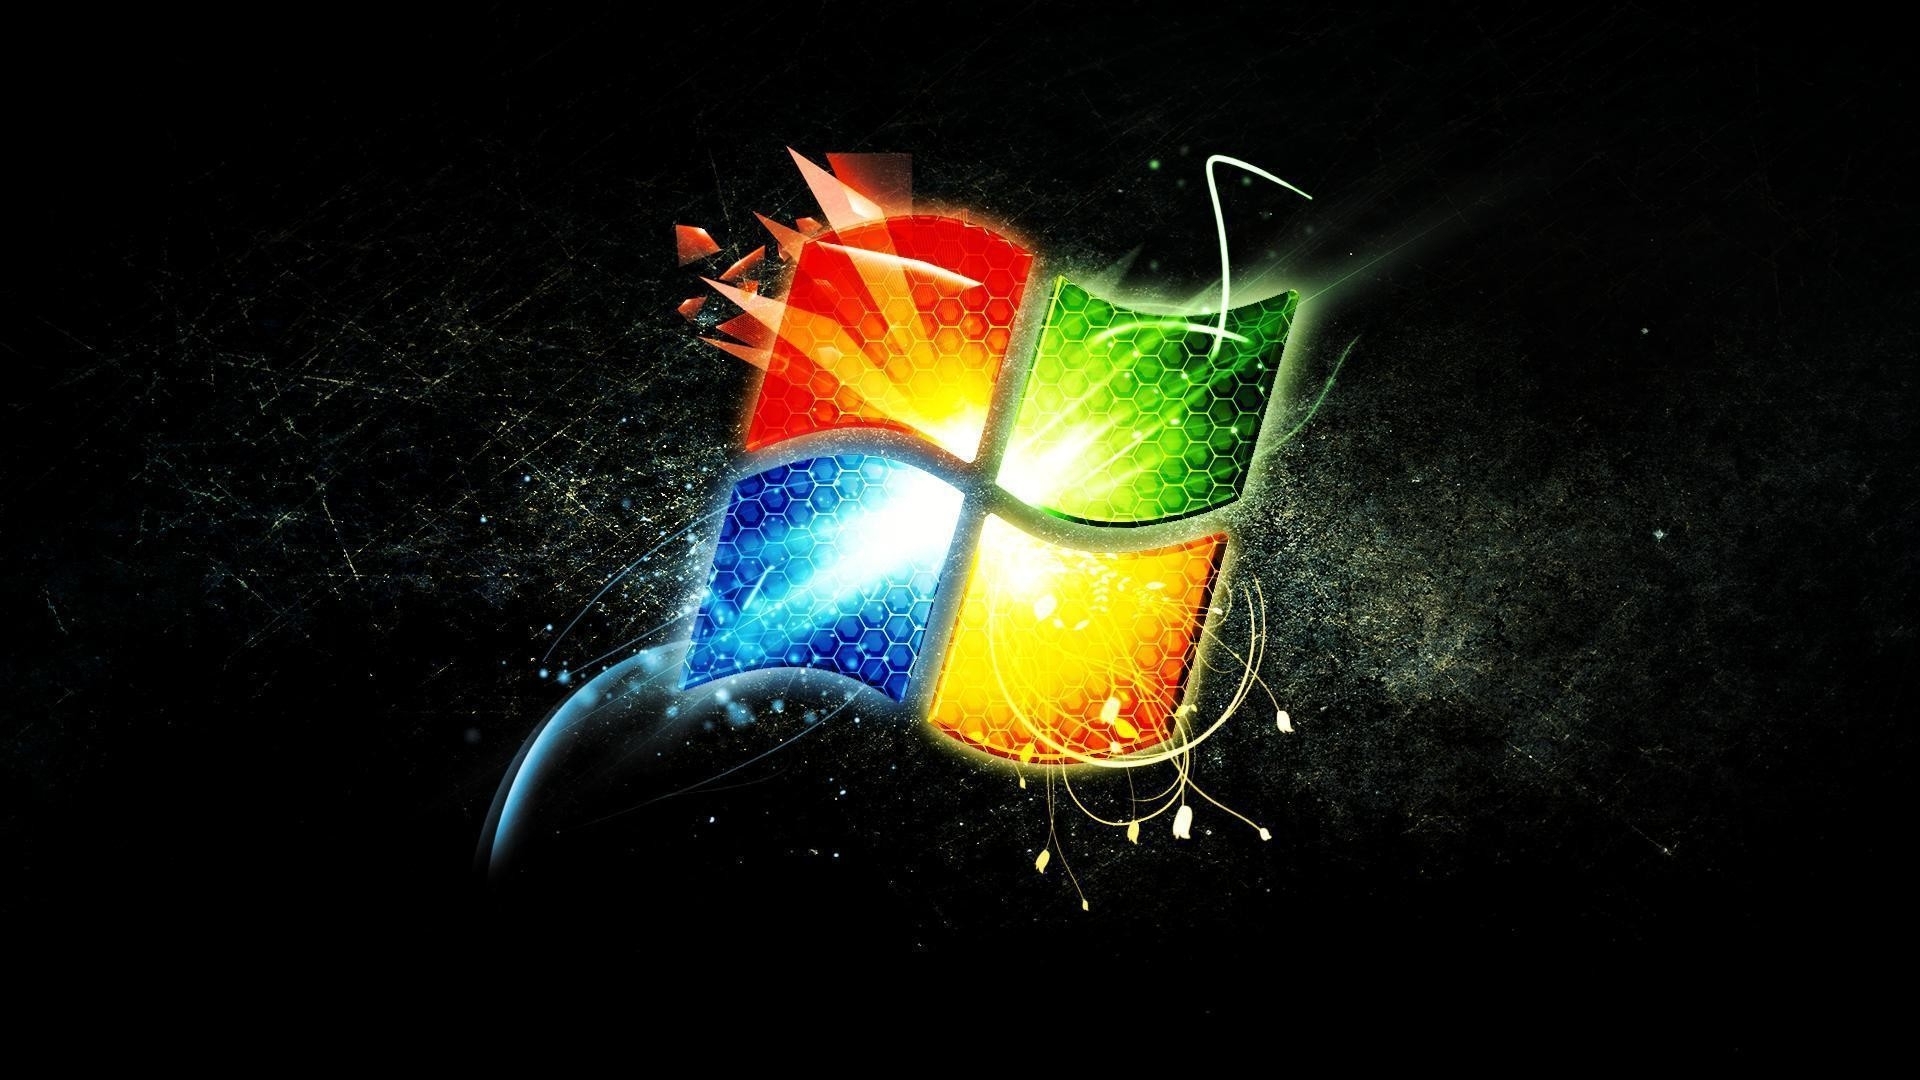 10 Latest Gif Wallpaper Windows 7 FULL HD 1080p For PC Background